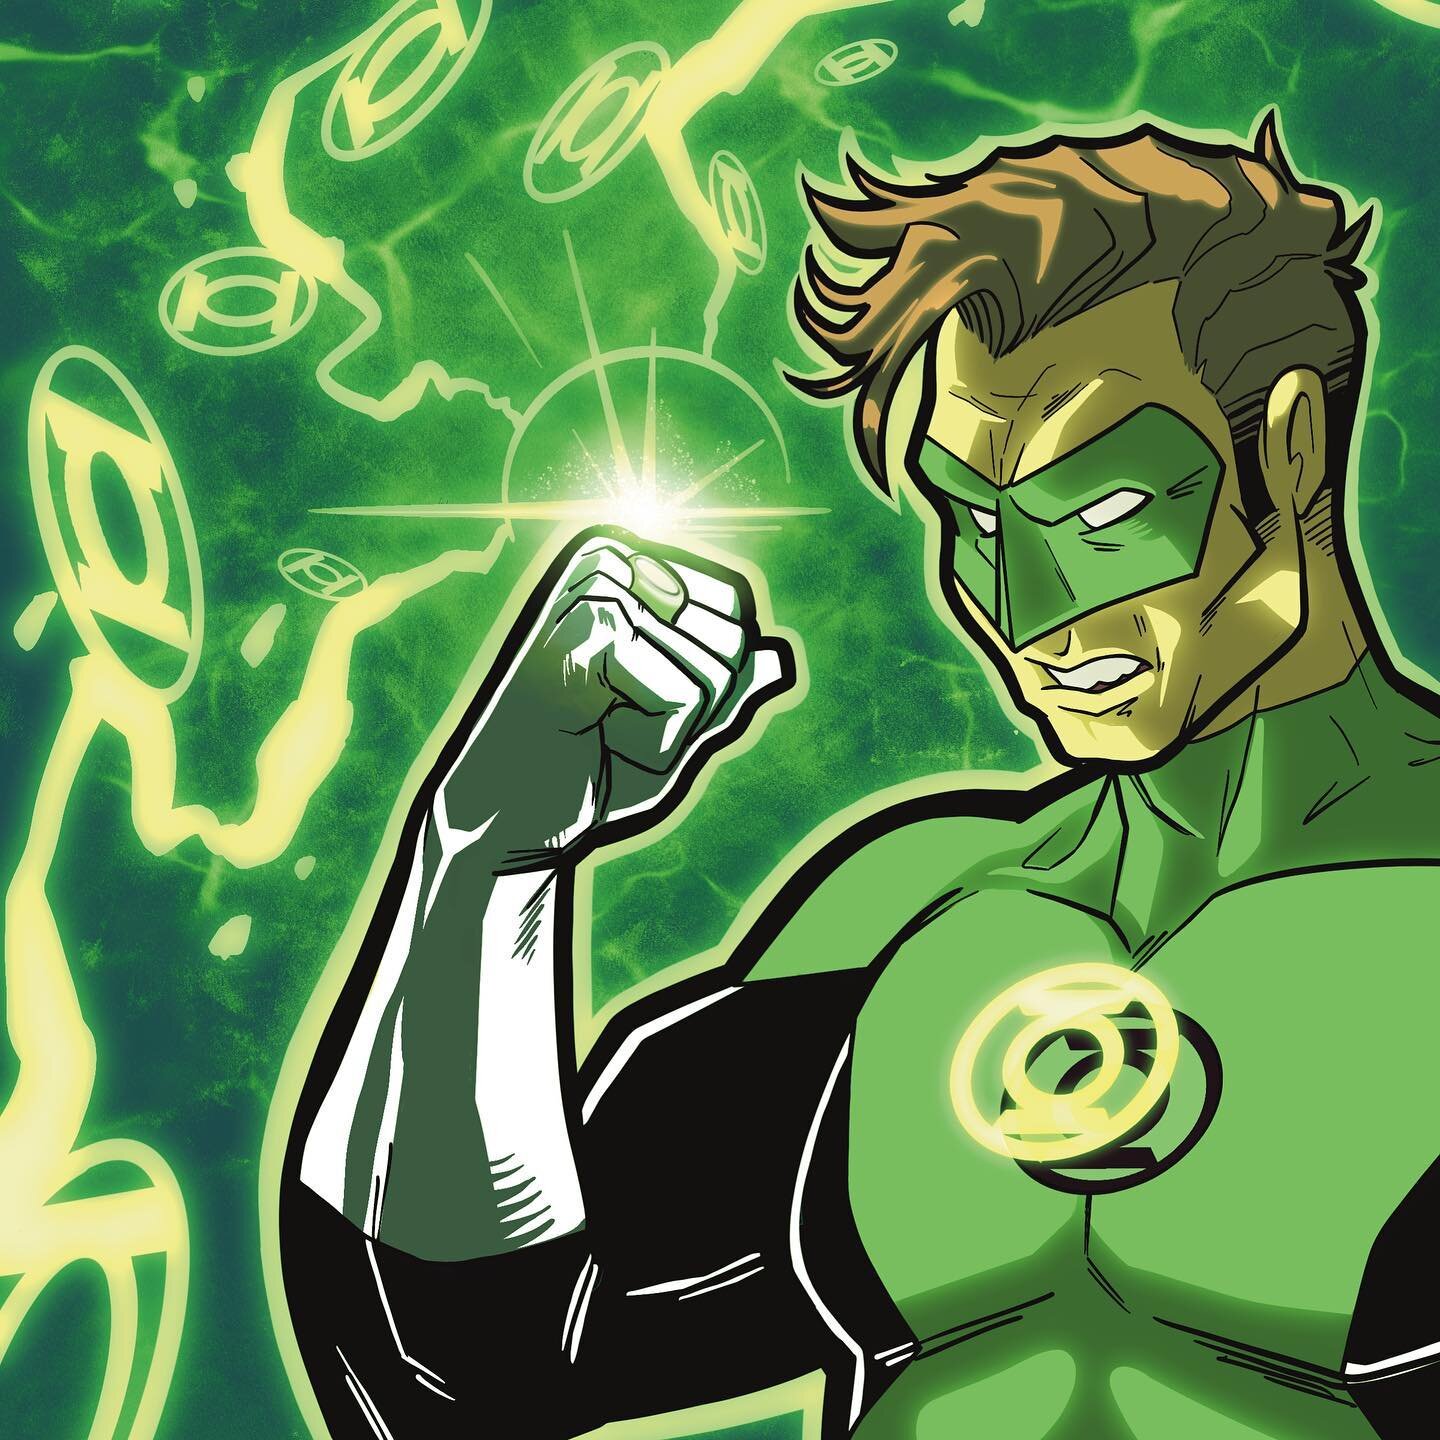 In Brightest Day 🟢
.
Some #GreenLantern for everyone who needs a little extra green today. Art by Bobby Schwartz
.
Read our comic book, DUAL ANIMAL: ISSUE ZERO for FREE at the bio link ➡️
.
#haljordan #dc #dccomics #dcmultiverse #green #lantern #fan